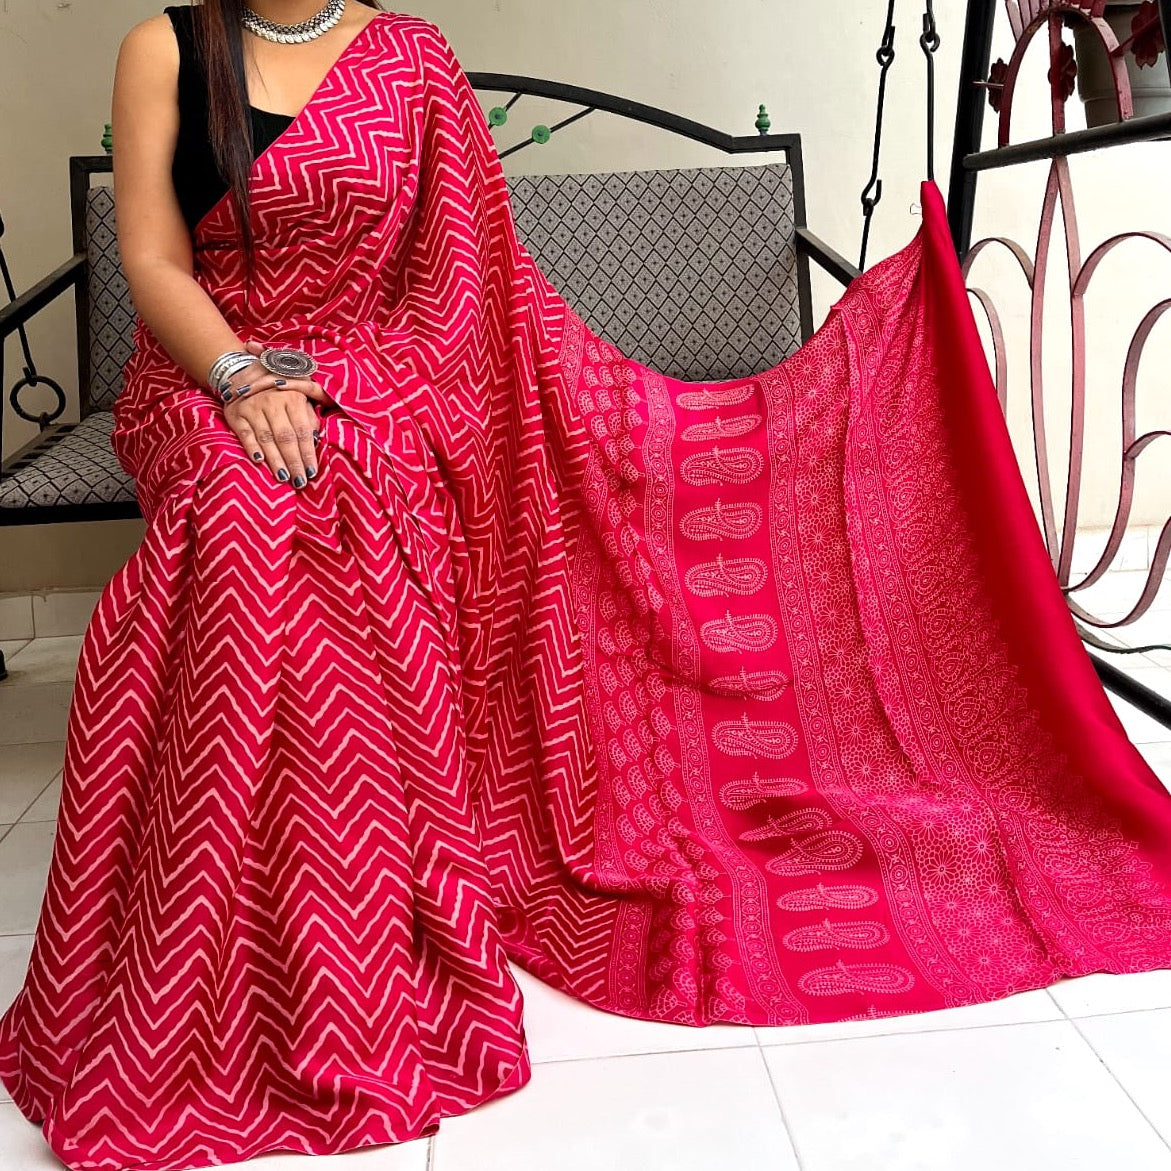 Modal Silk Ajrakh Saree With Natural Dyes - Red, Maroon, Black, Brown, Mustard Yellow, Bottle Green, Rani Pink, Navy Blue.